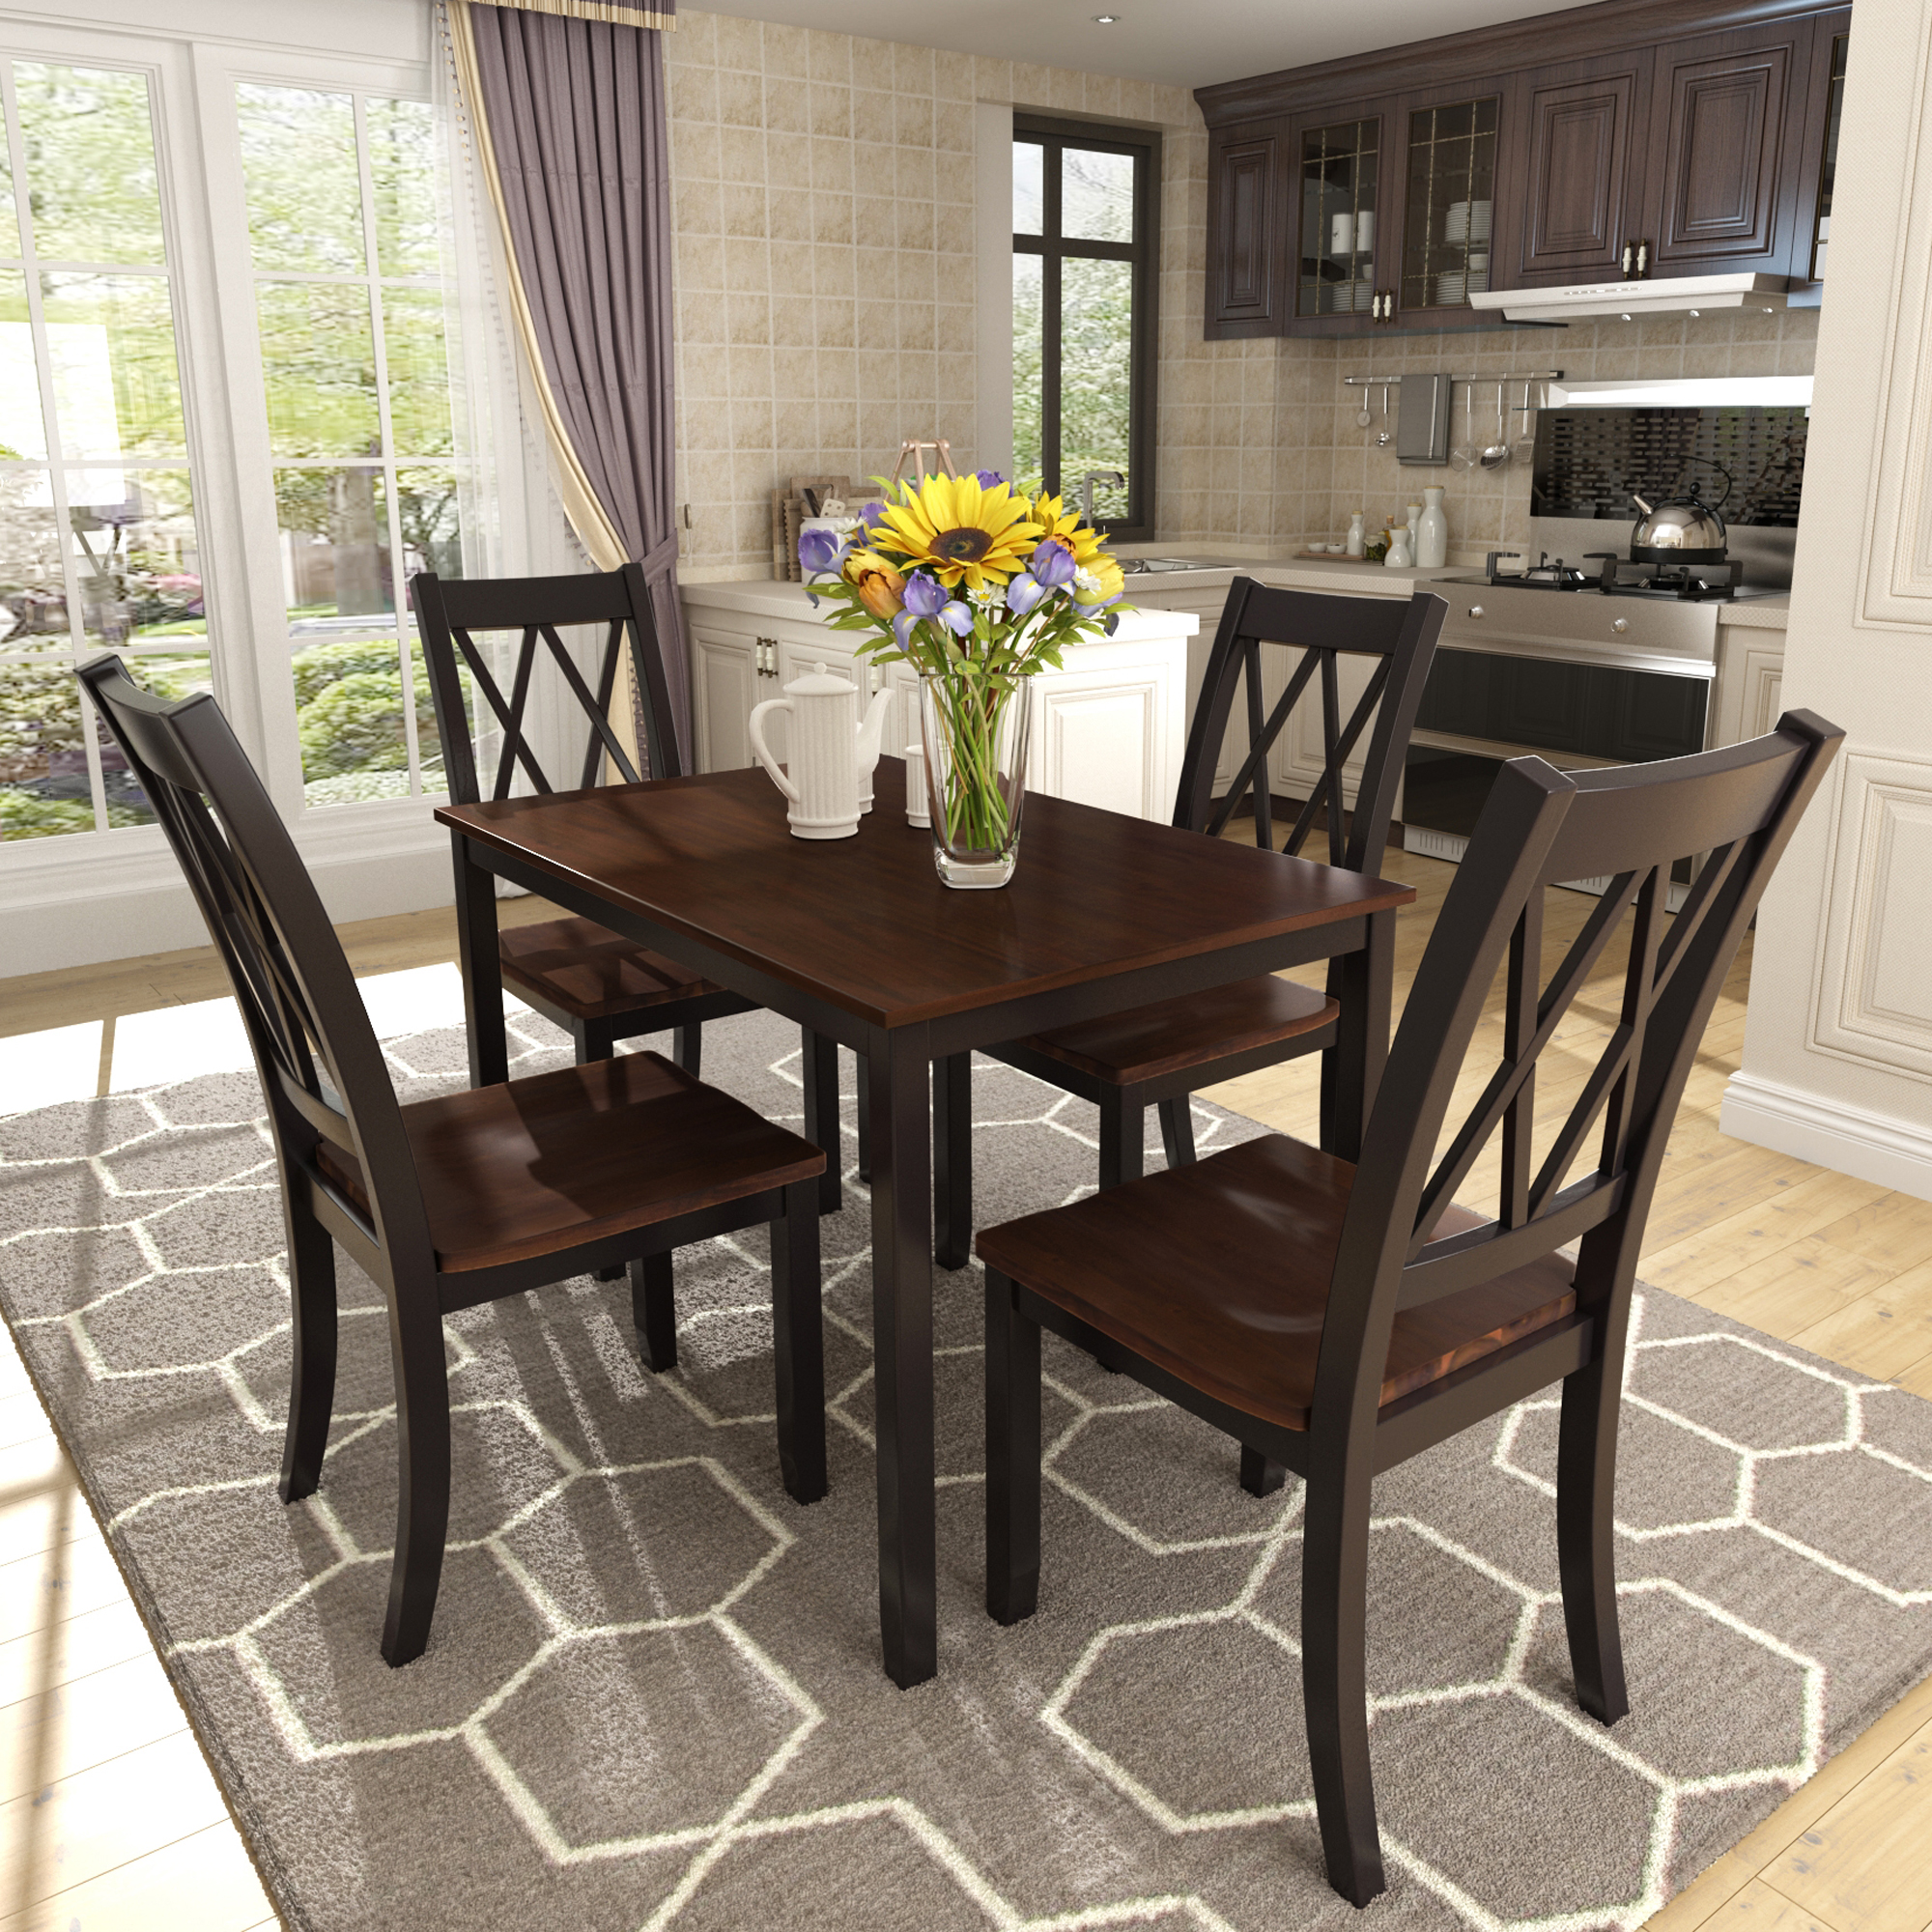 Rectangle Dining Table And, Dining Table Chairs Set Of 4 Black